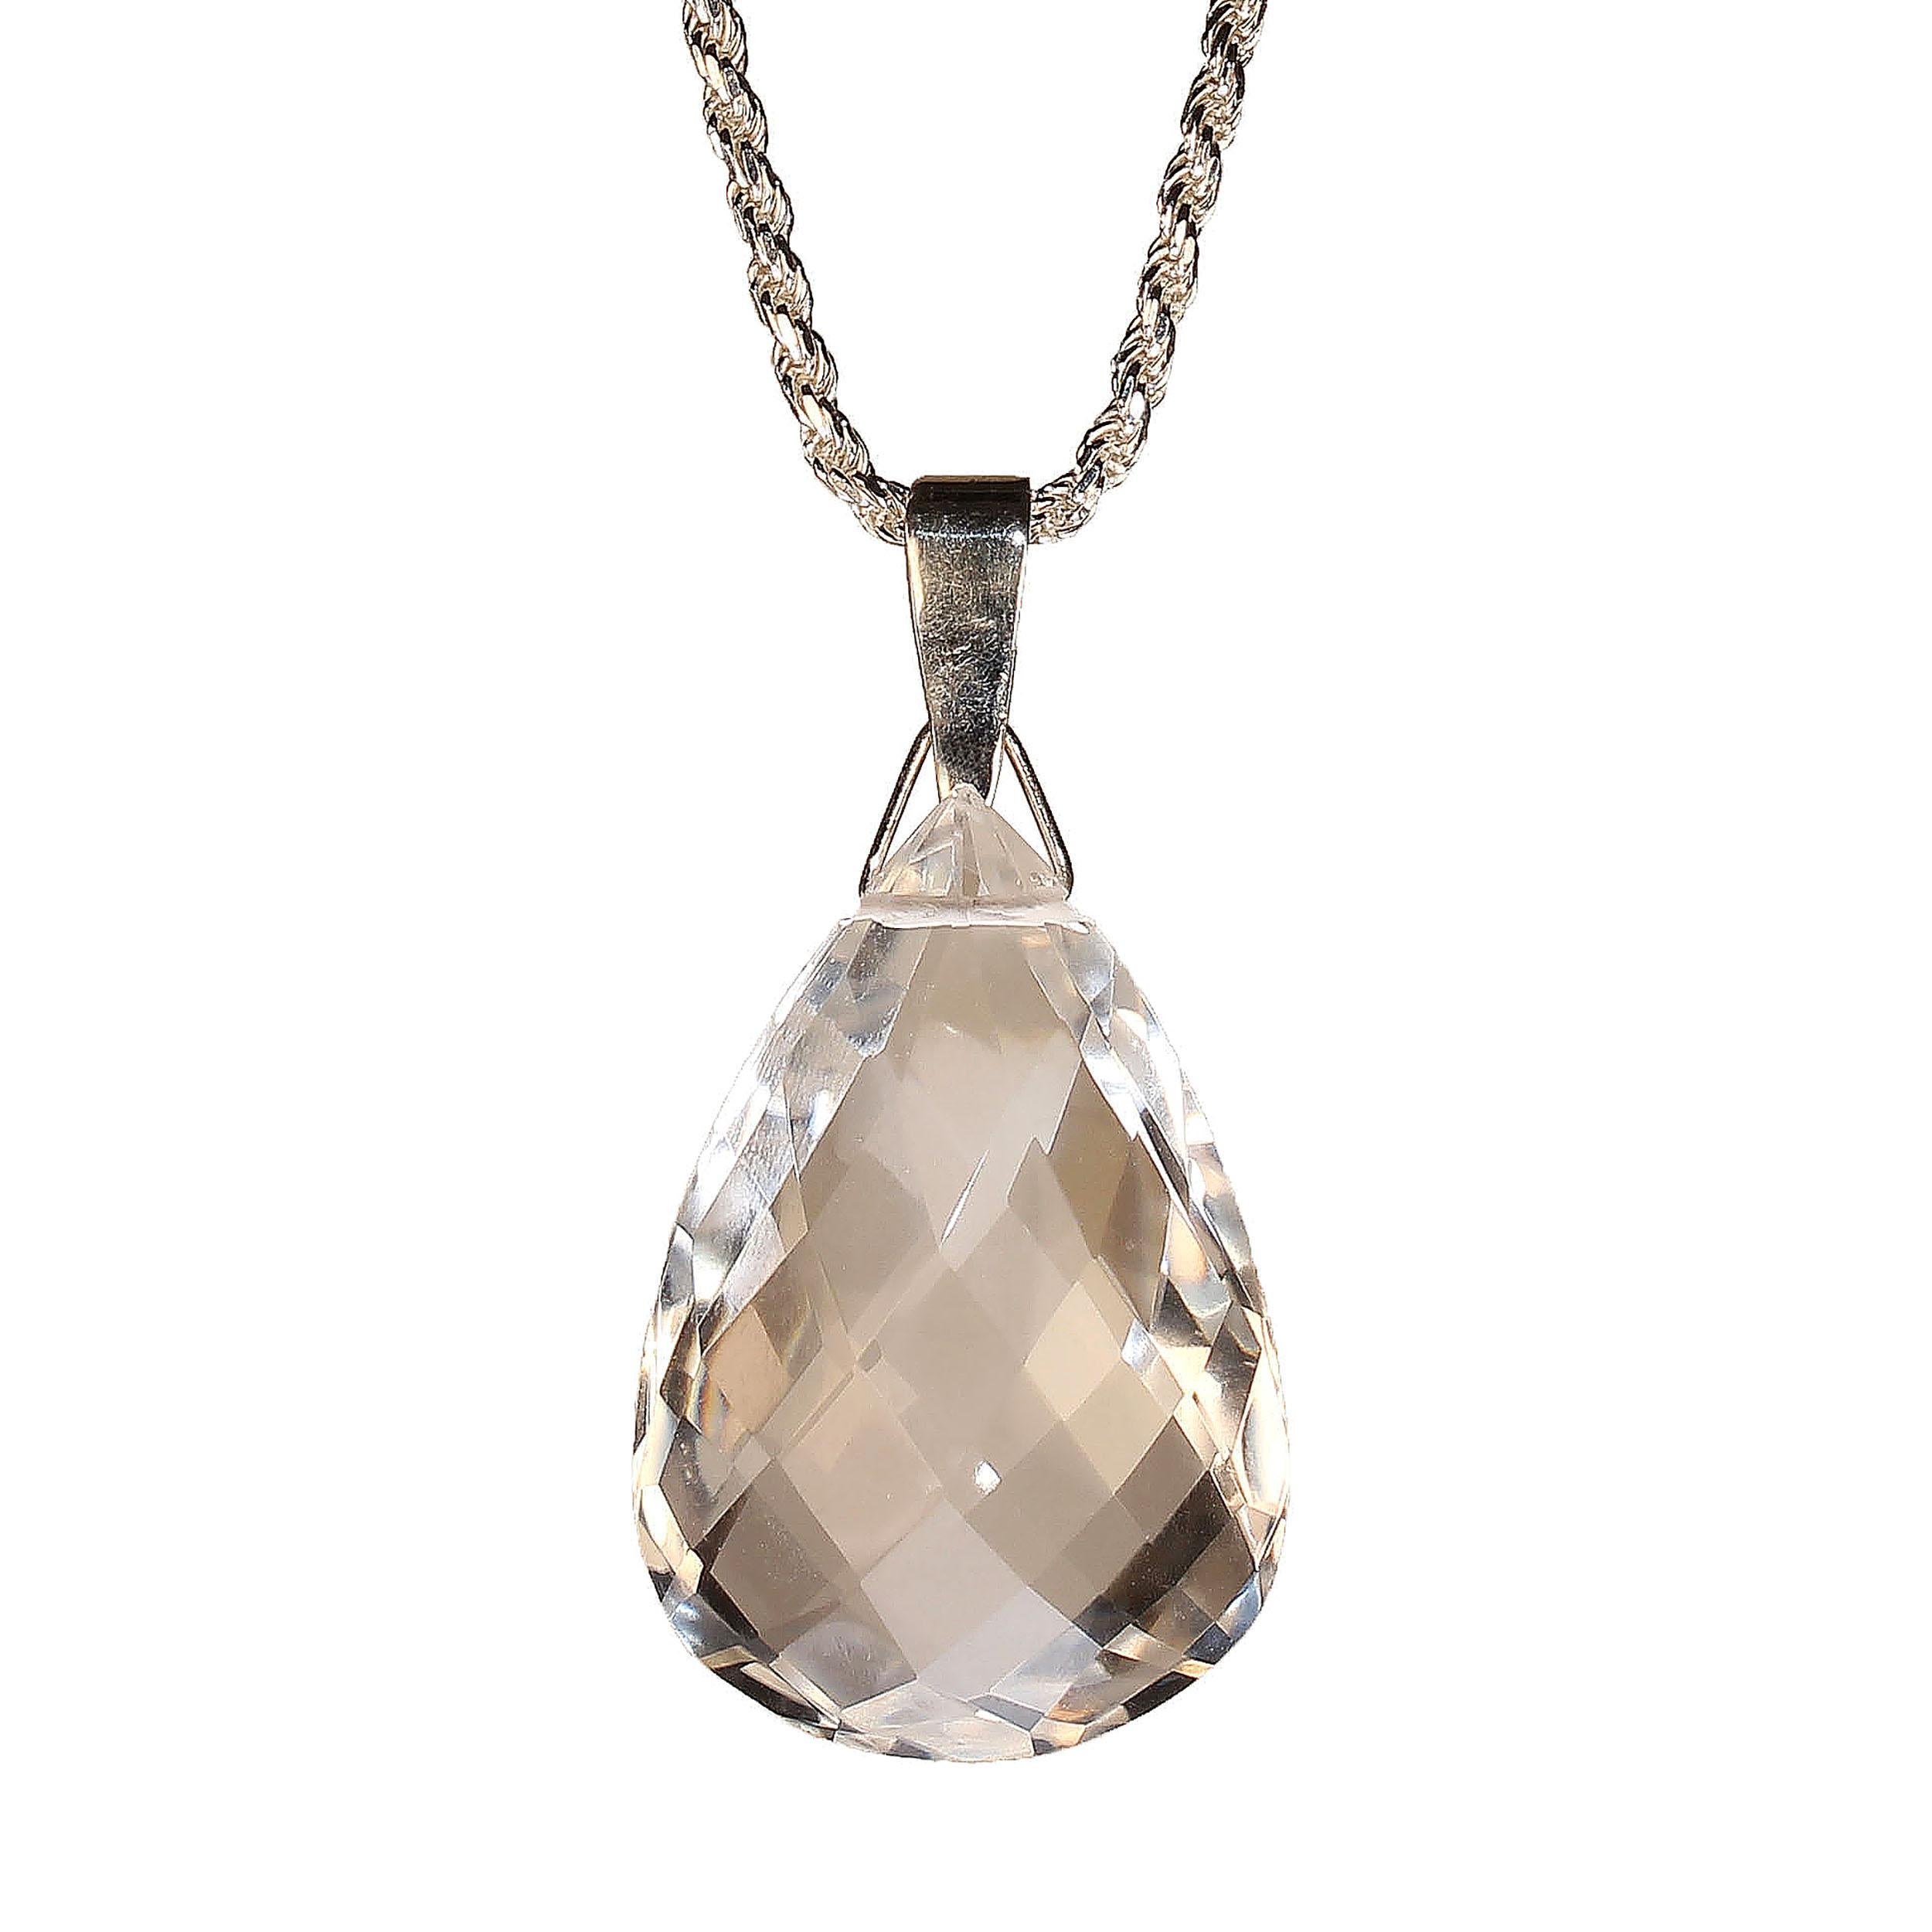 Pear Cut AJD Sparkling Faceted Crystal Pendant 132 Carats For Sale